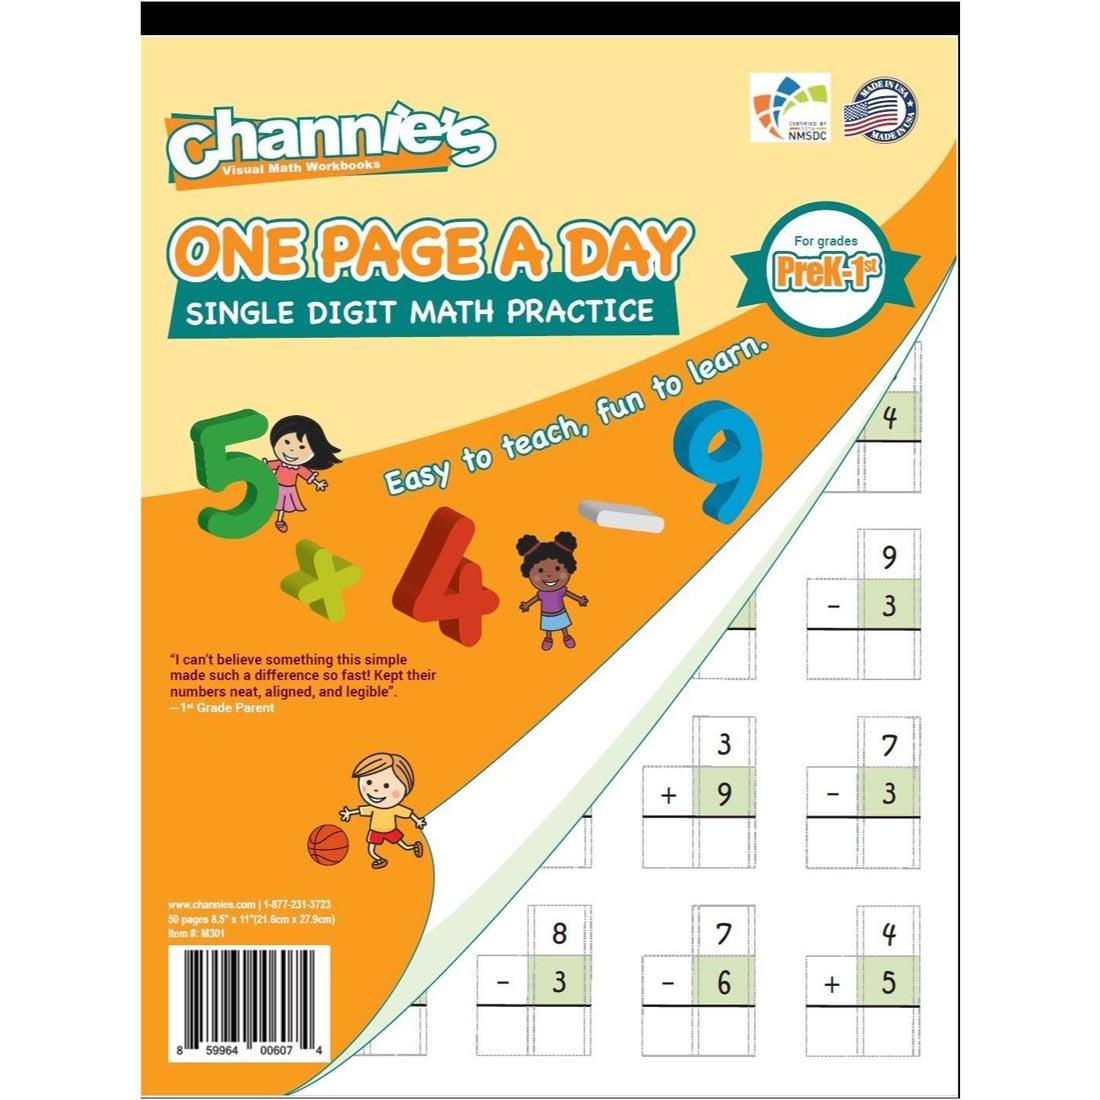 Channie's Visual Math Workbook: One Page a Day Single Digit Math Practice